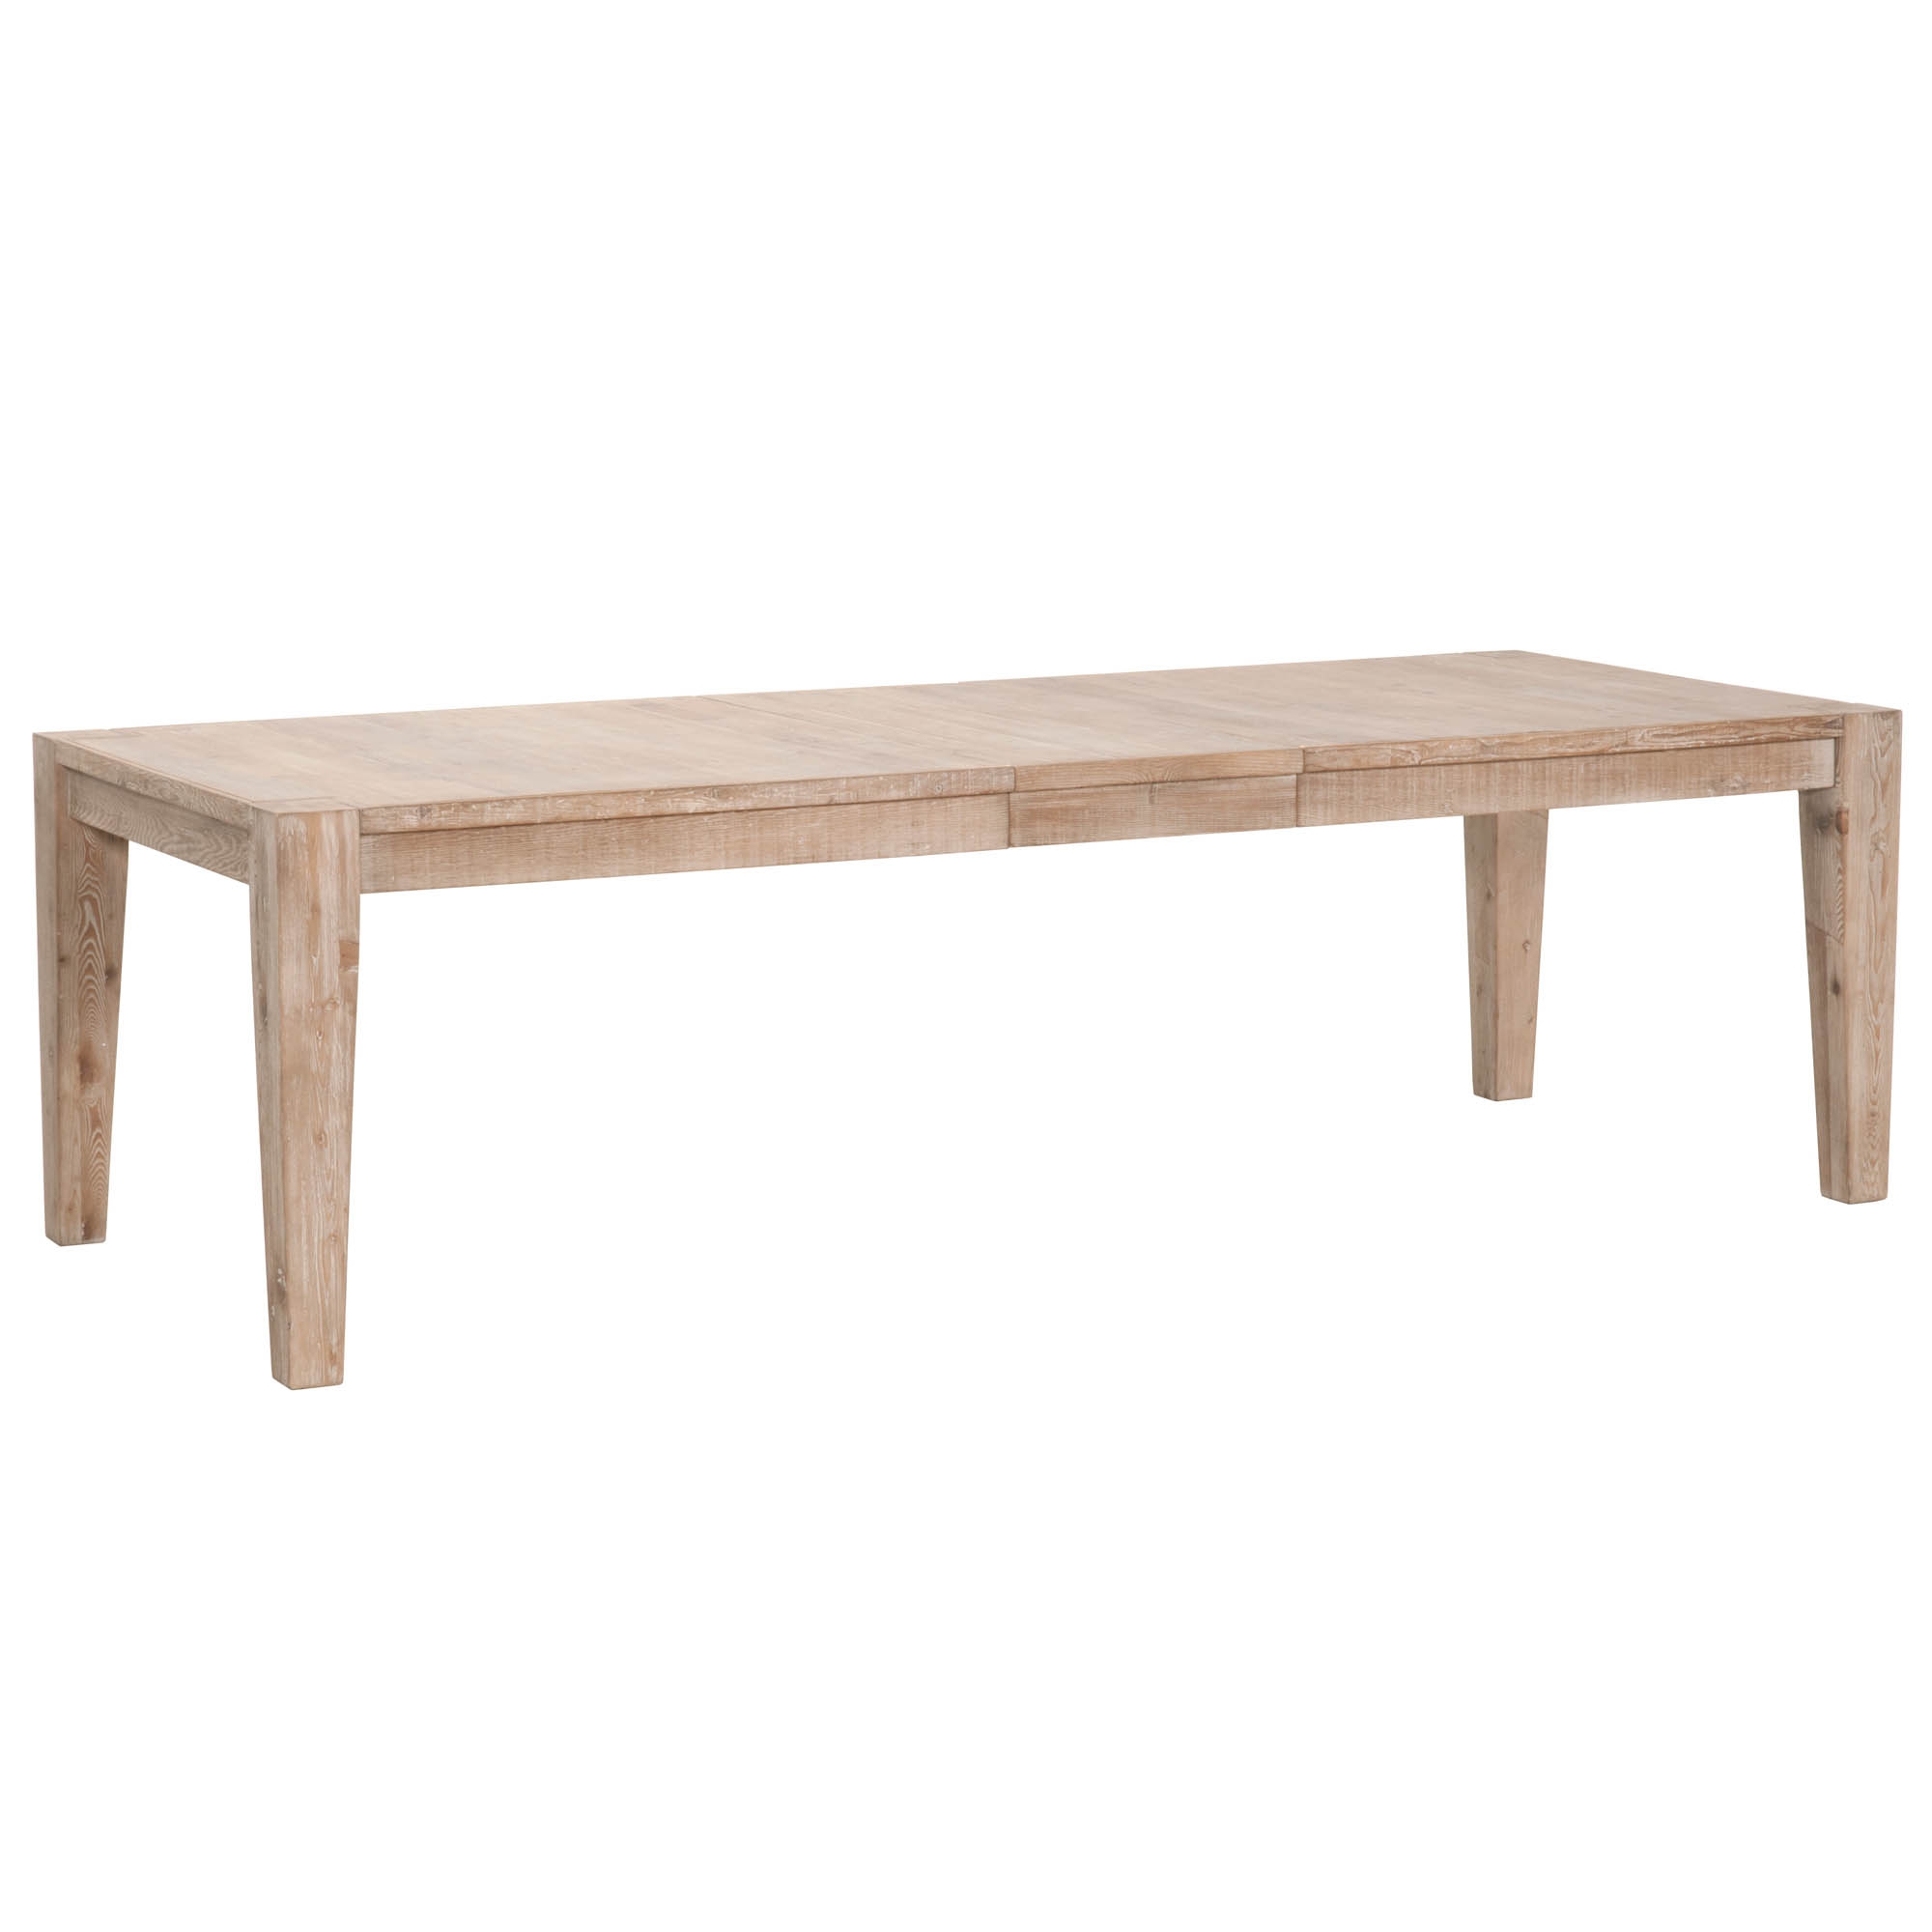 Canal Extension Dining Table - Image 1